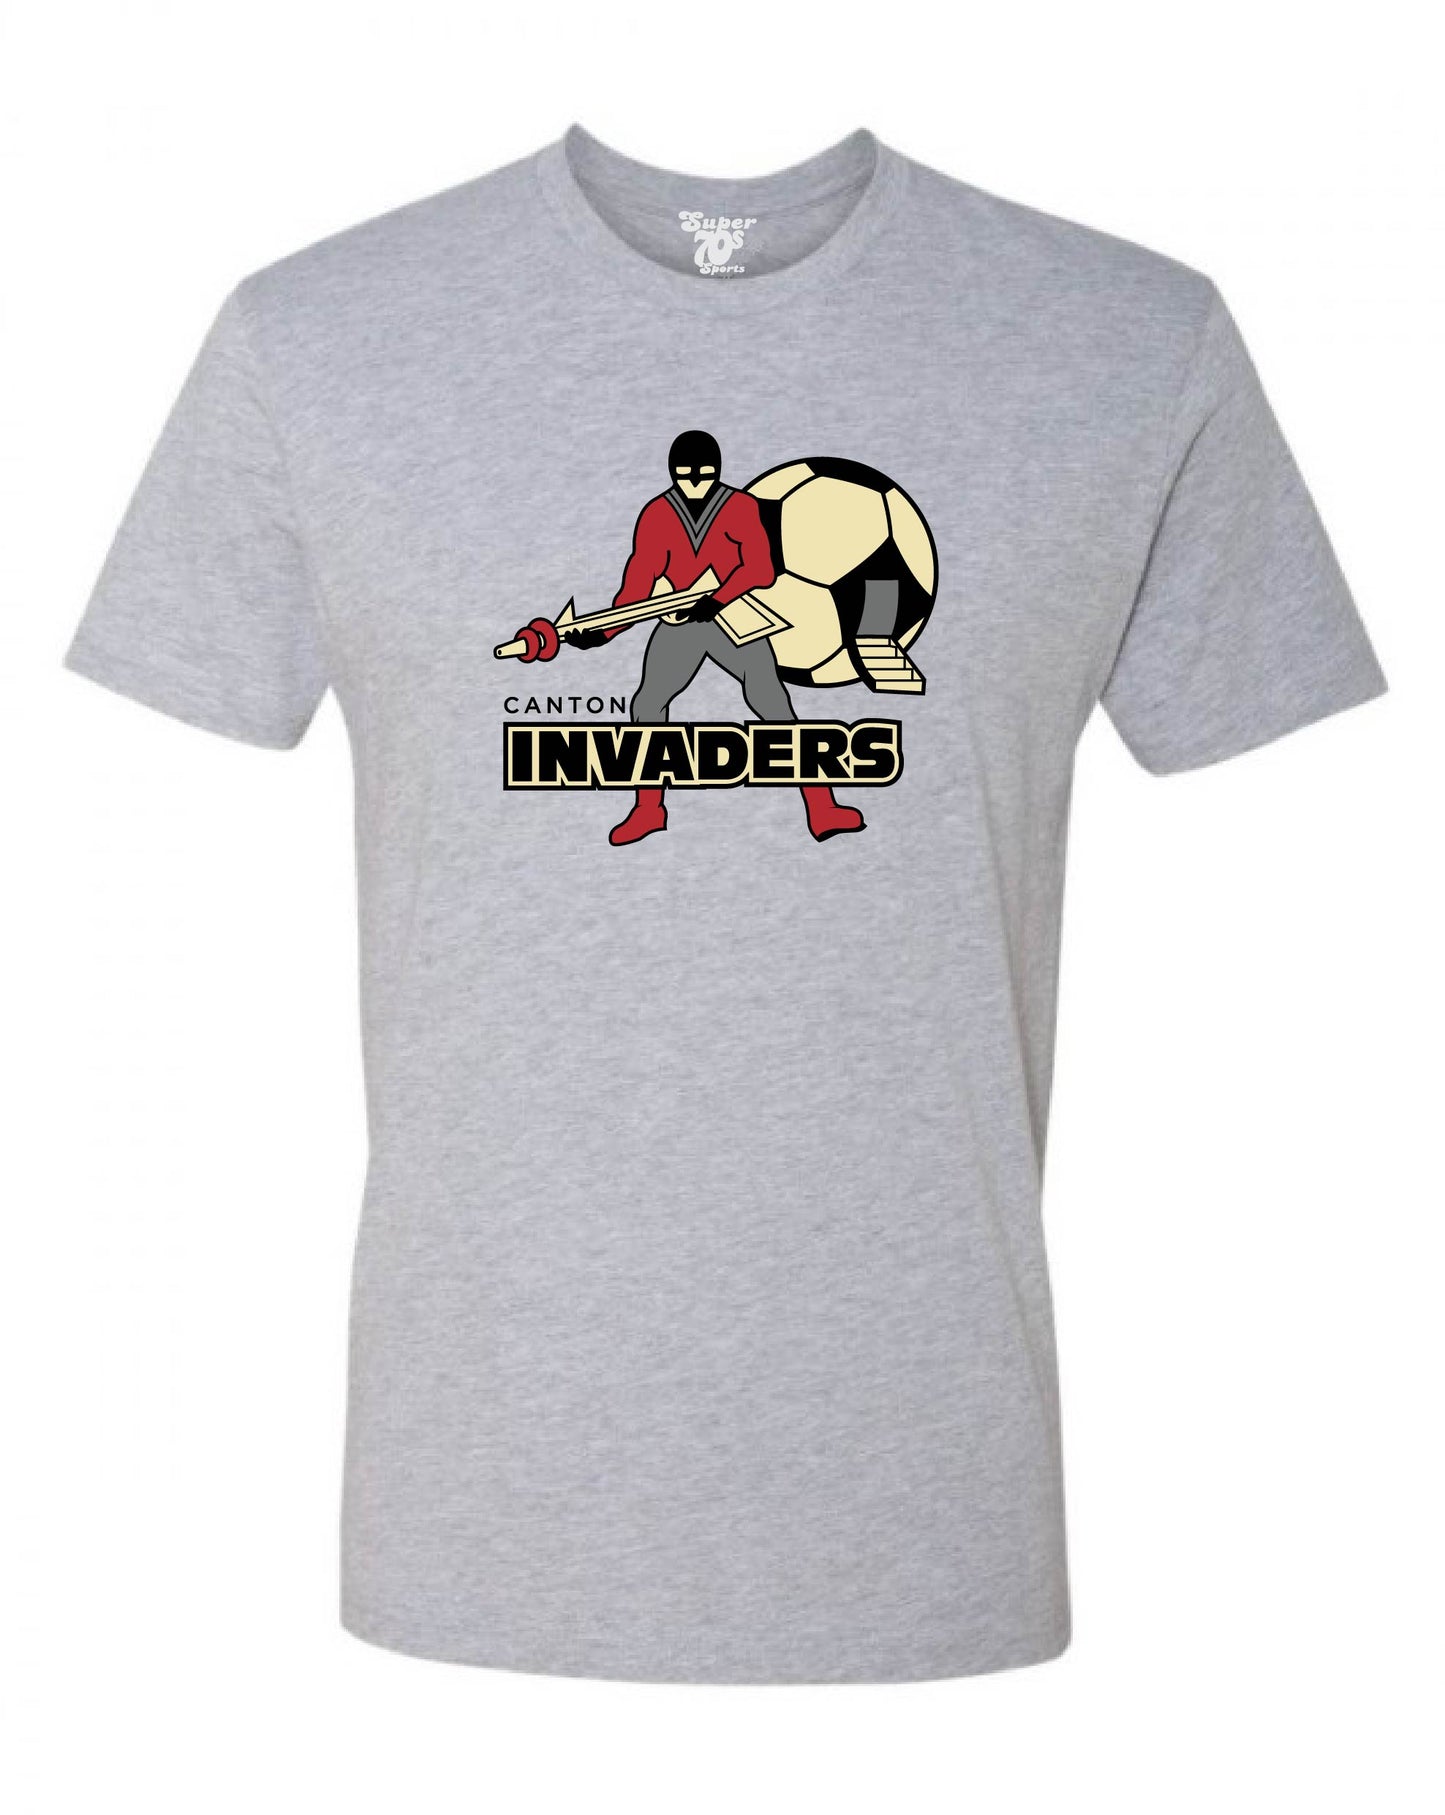 Canton Invaders Tee